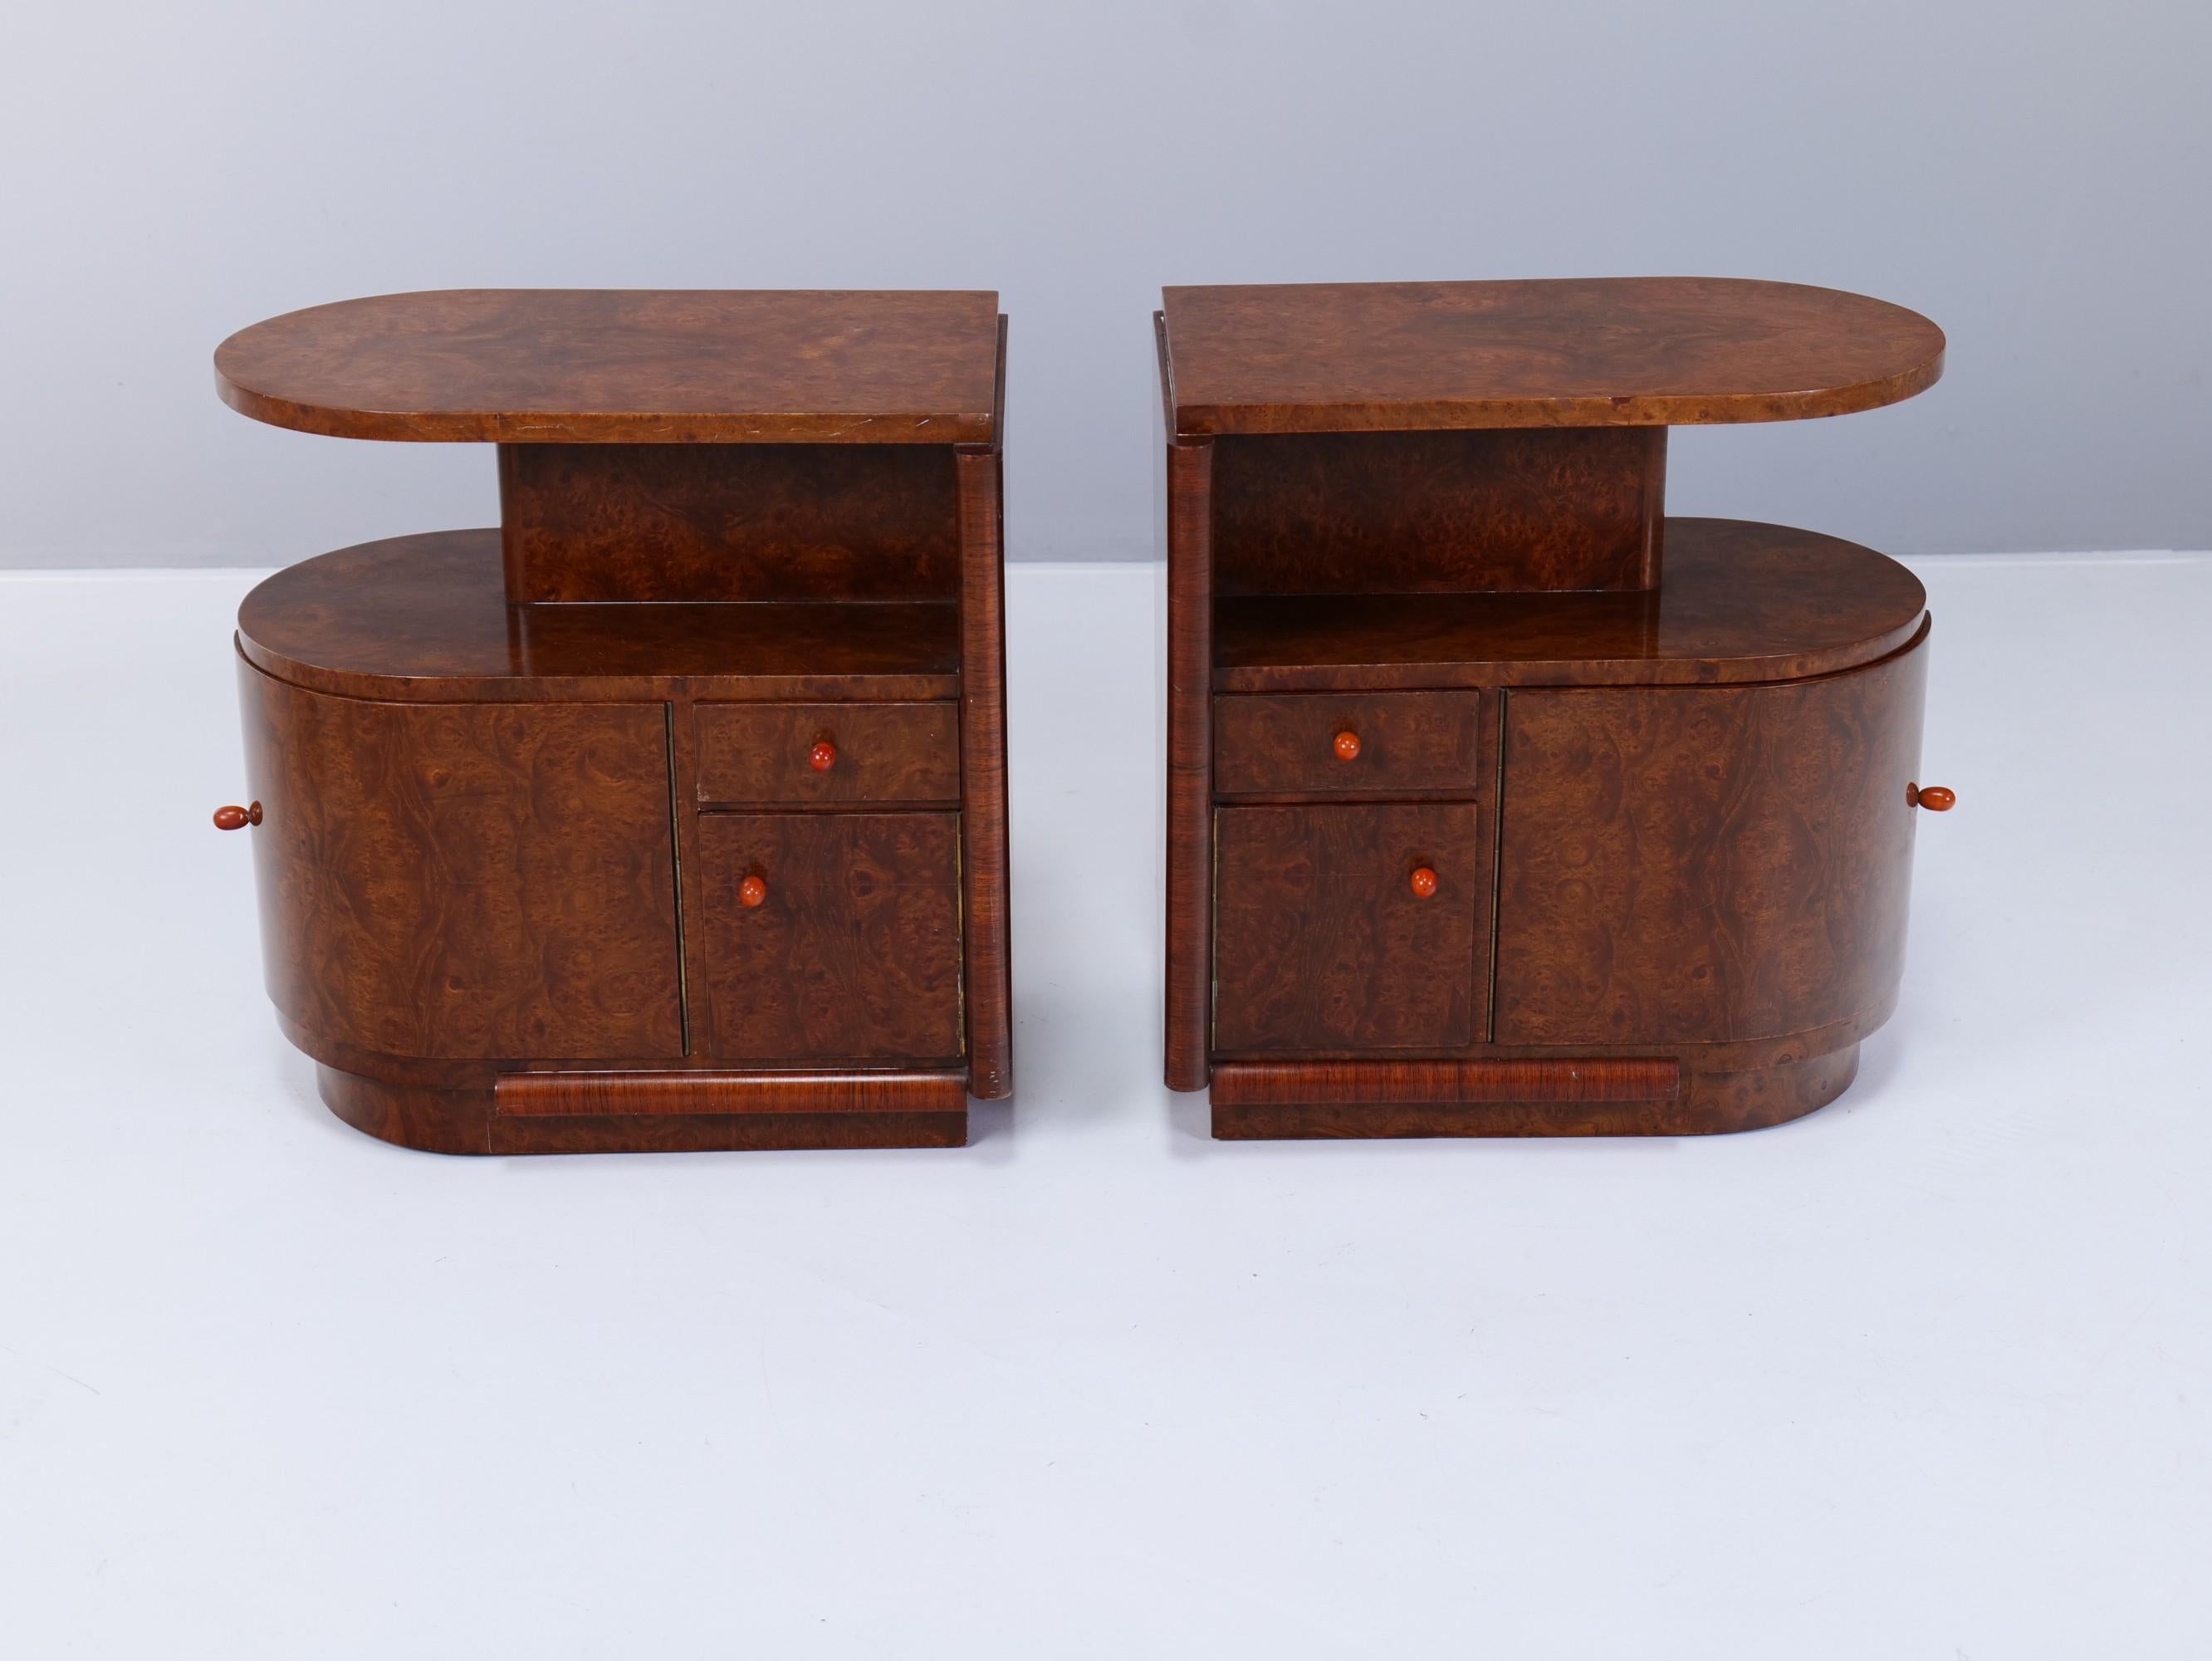 The two pieces of furniture are made in ash root veneer and are suitable to be placed on the side of a bed or sofa.
They are excellently finished.

